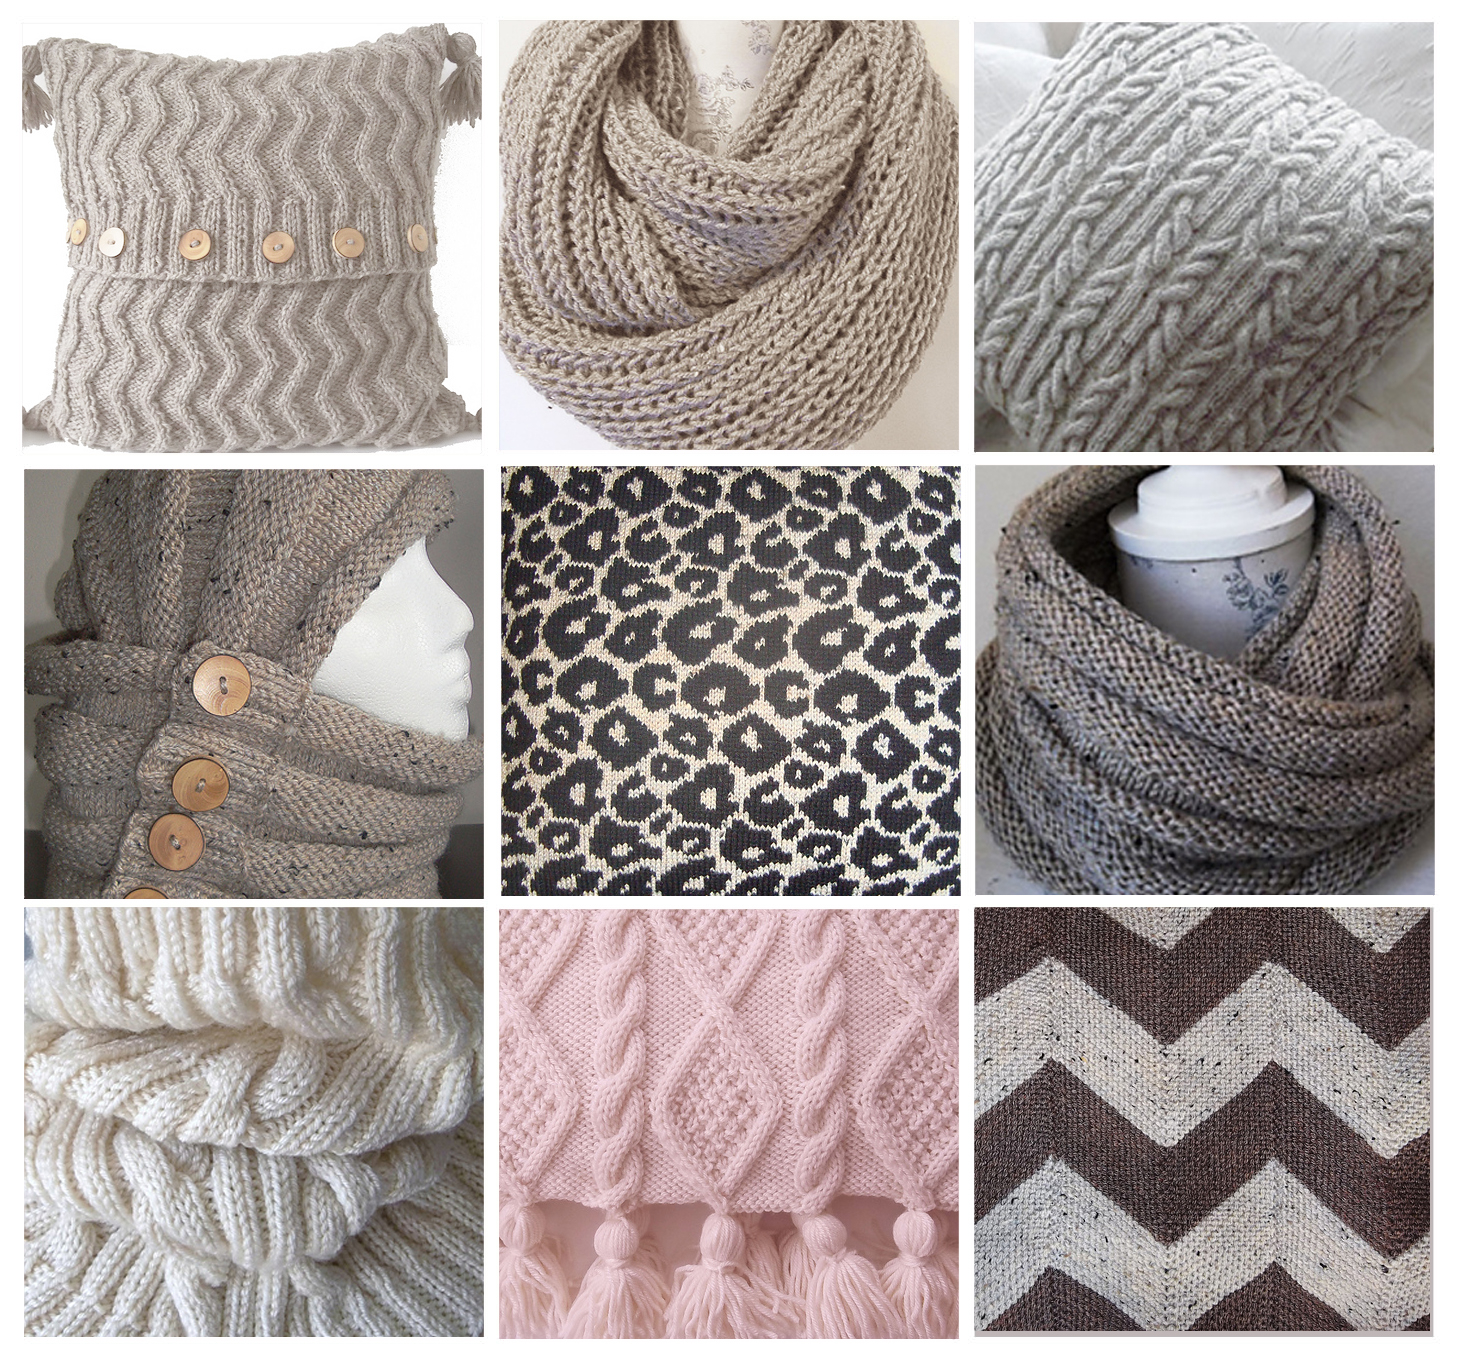 Knitting Patterns For Cushions Knitting Patterns Trending Cushions Cowls And Throws